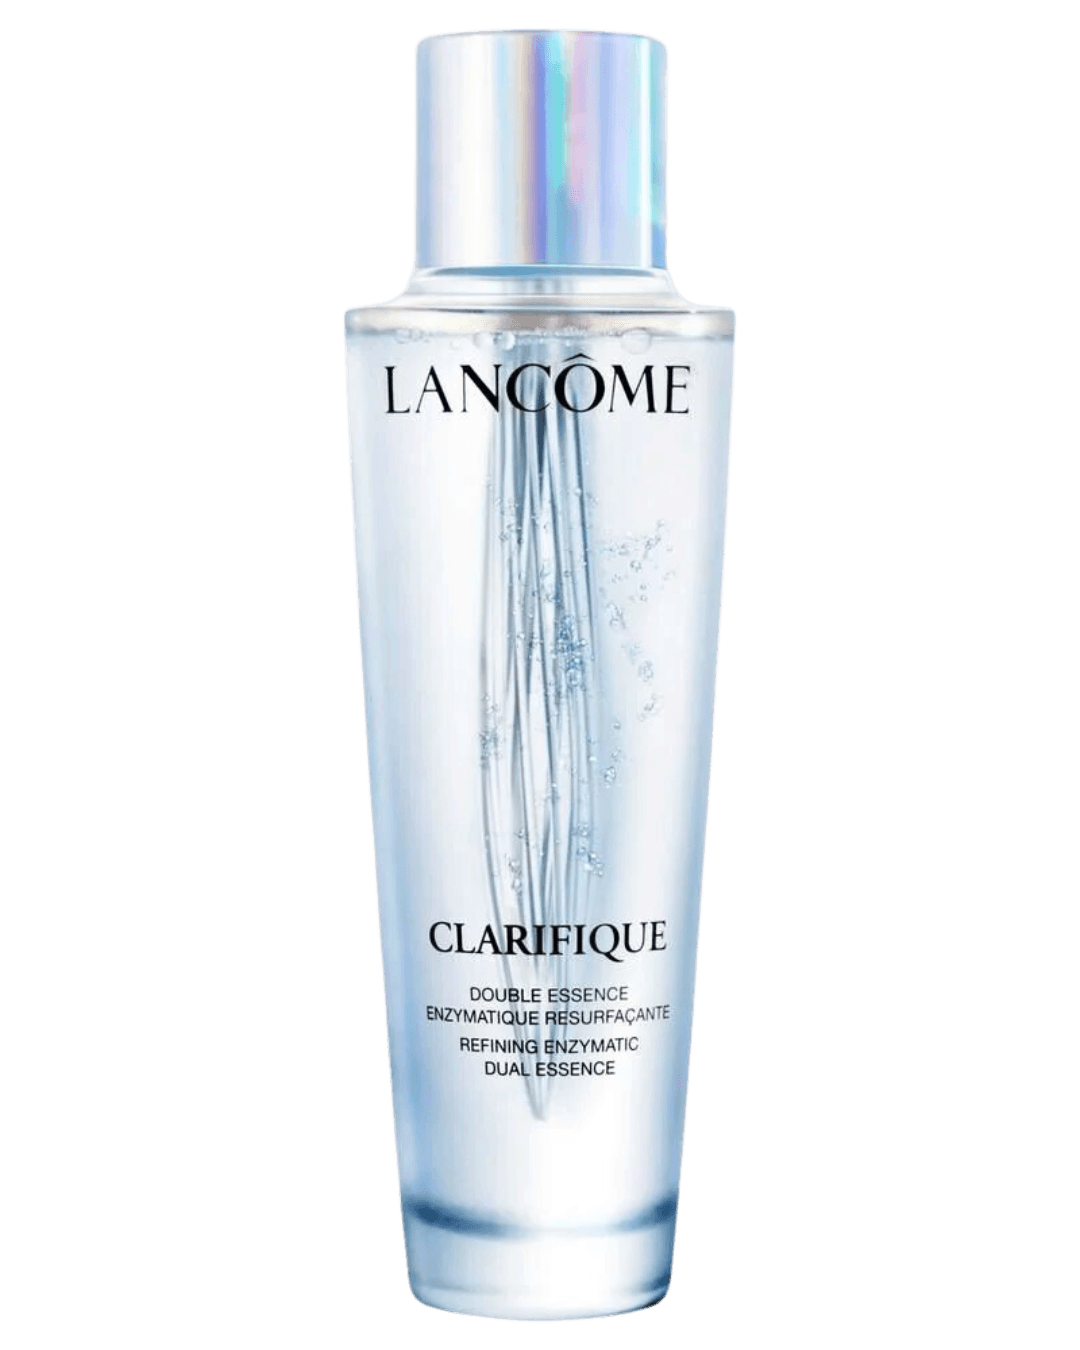 Daily Vanity Beauty Awards 2024 Best Skincare Lancôme Clarifique Dual Essence Voted By Beauty Experts